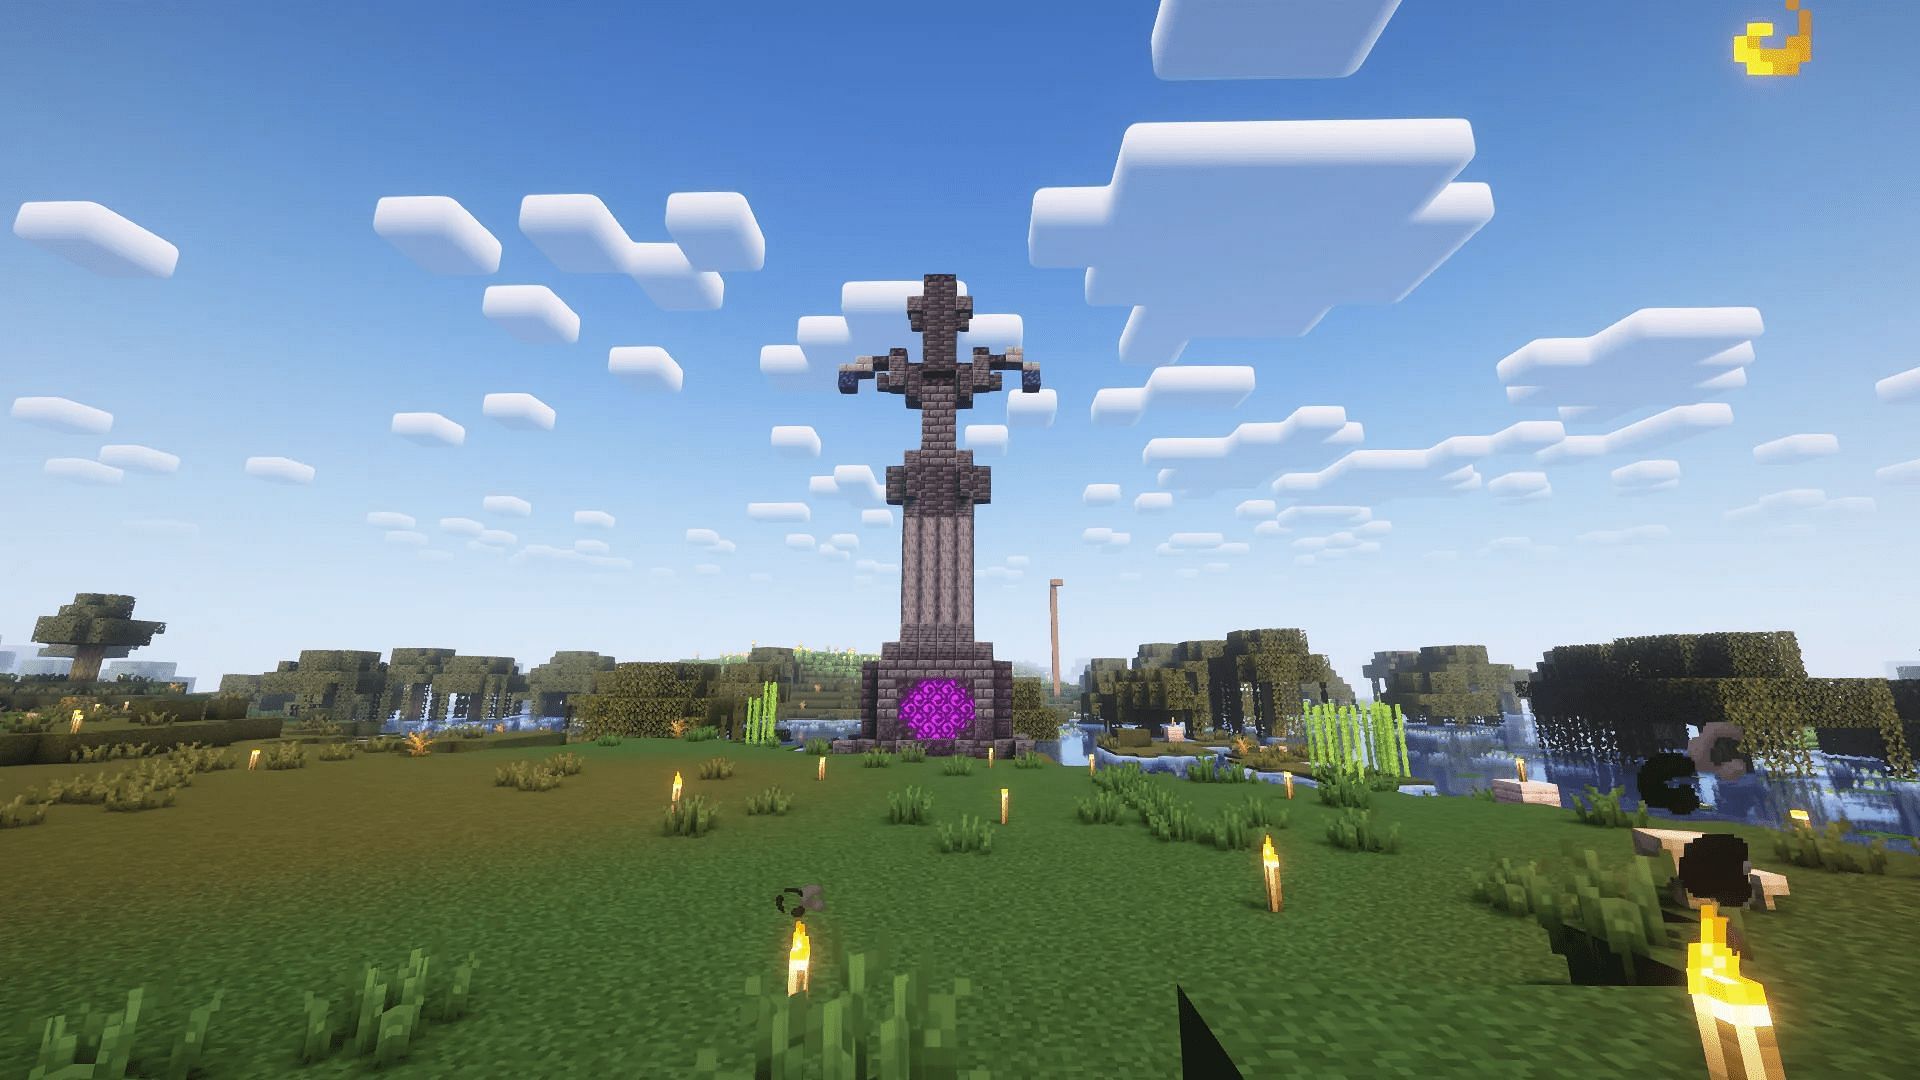 Creating great Minecraft builds is only limited by a player